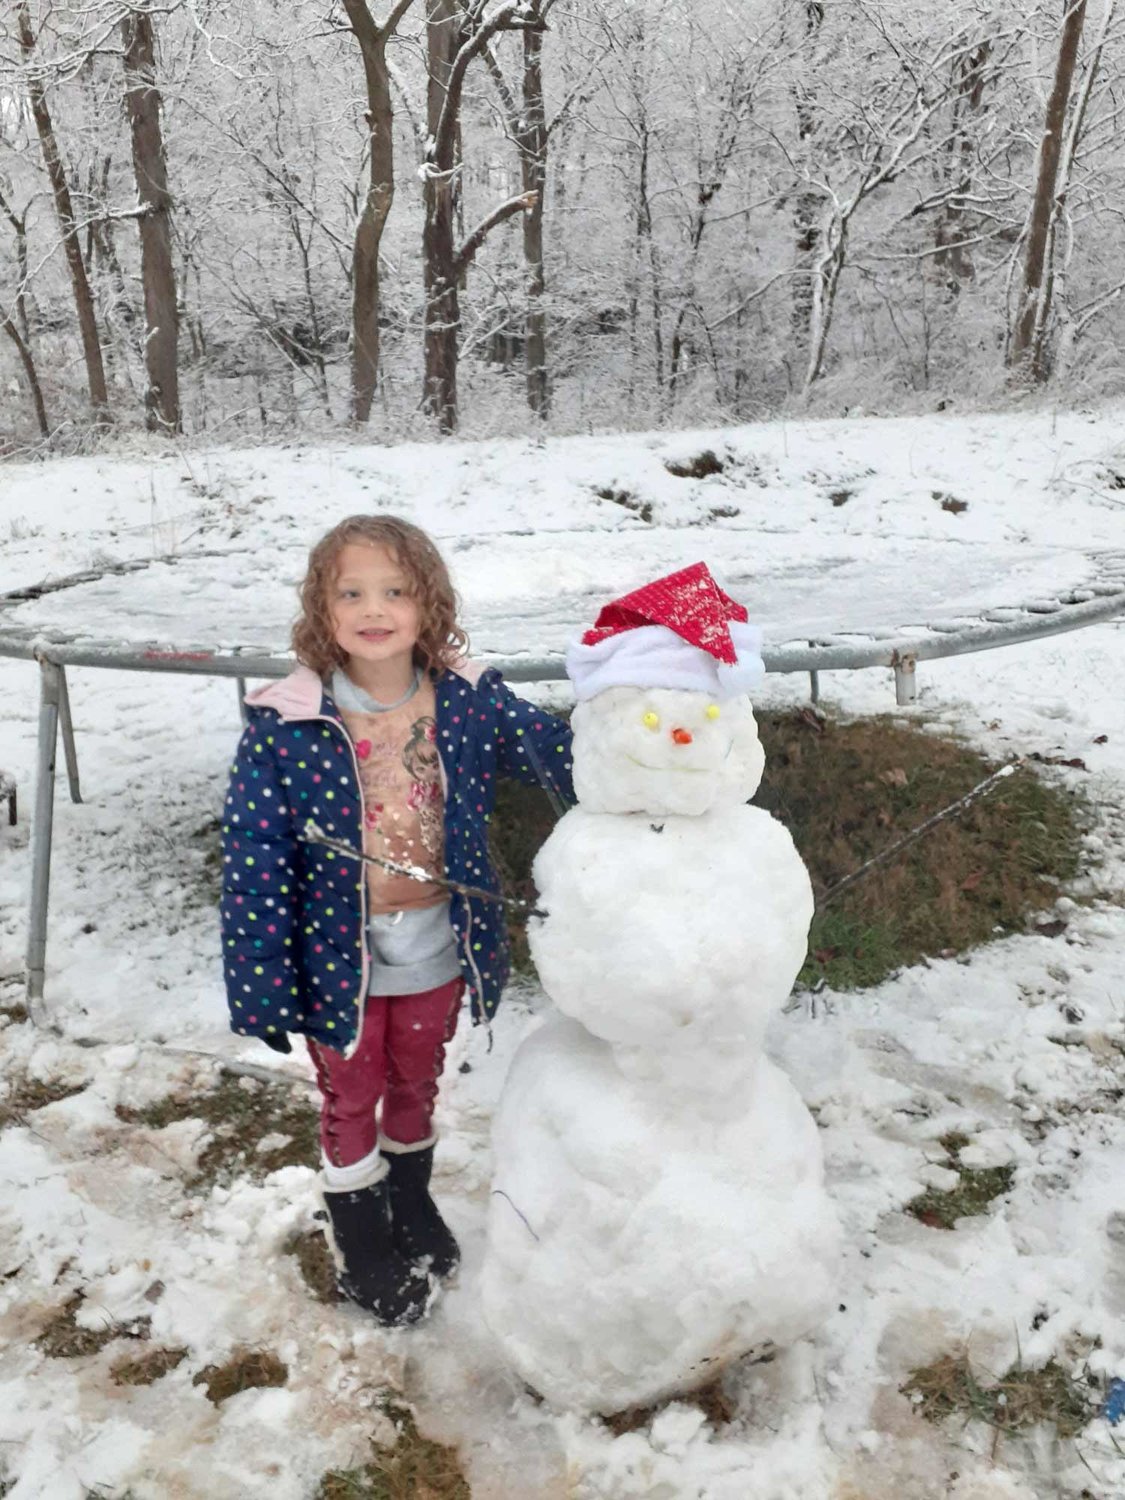 6-year-old Julie York of Kingston made her first Snowman.